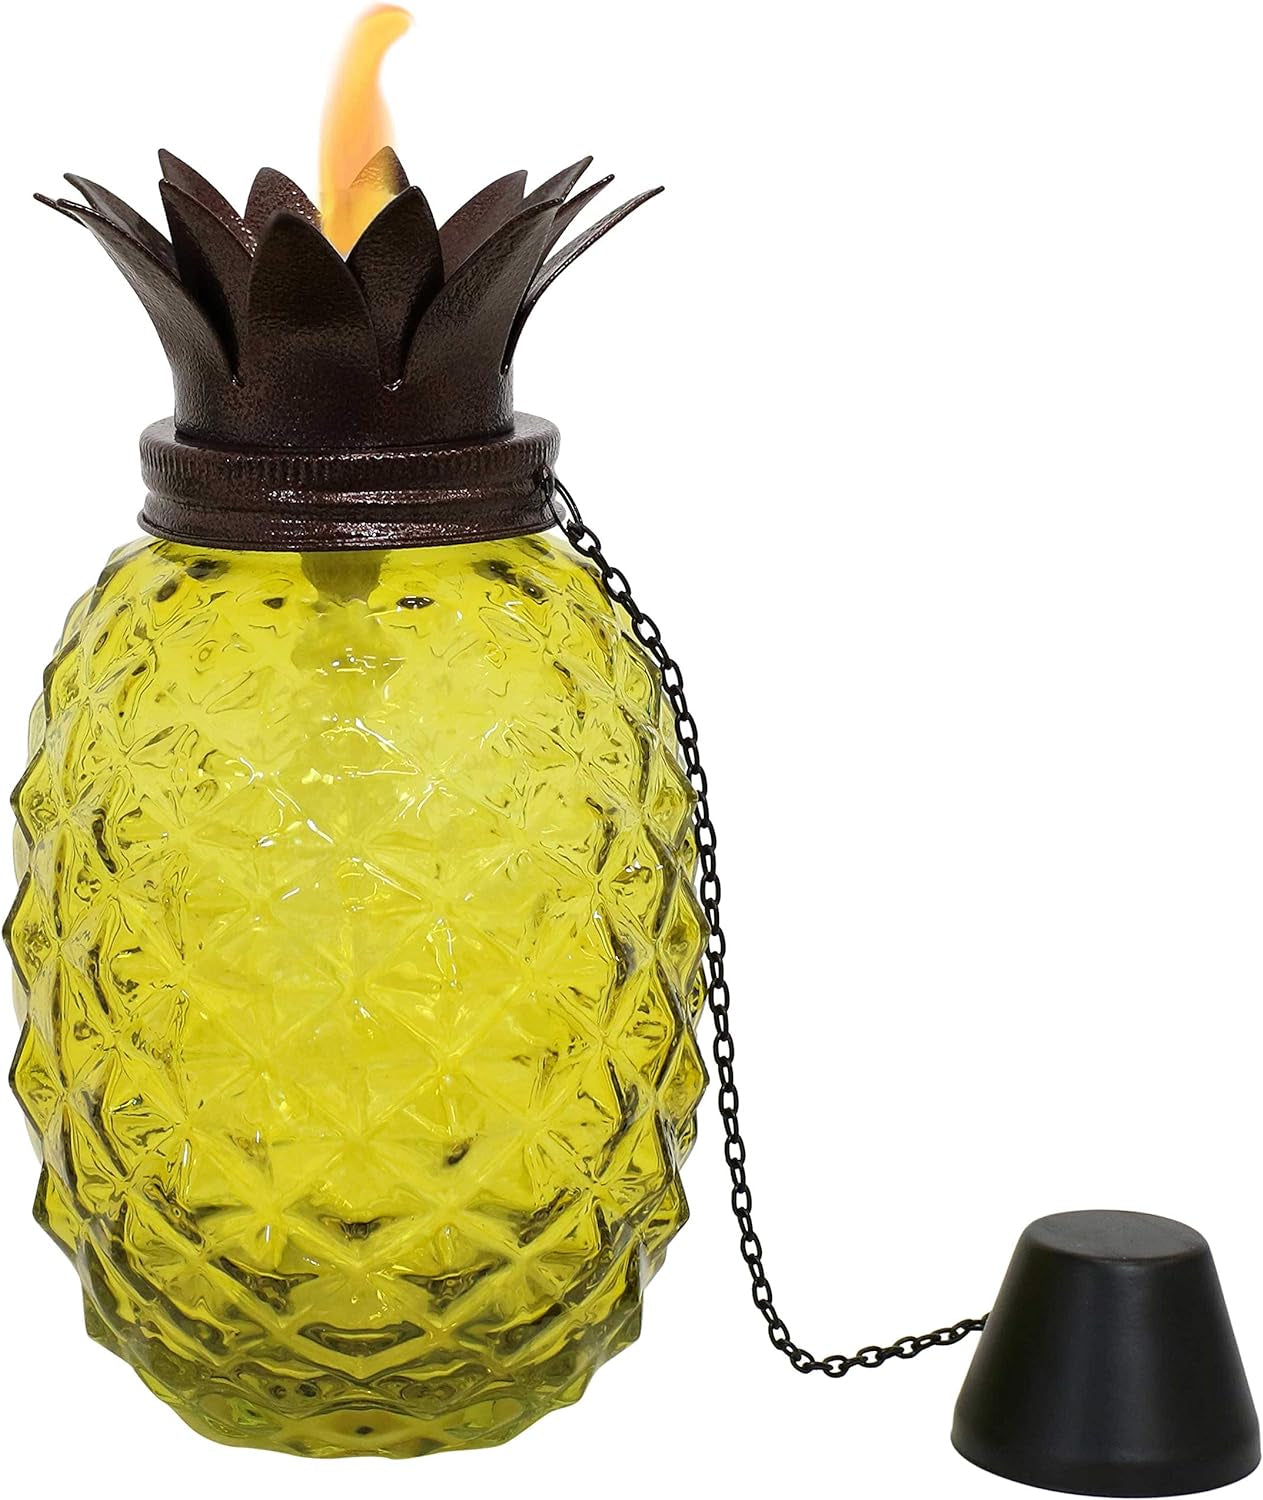 Tropical Pineapple 3-In-1 Glass Patio Torches - 23- to 63-Inch Adjustable Height - Set of 2 - Yellow